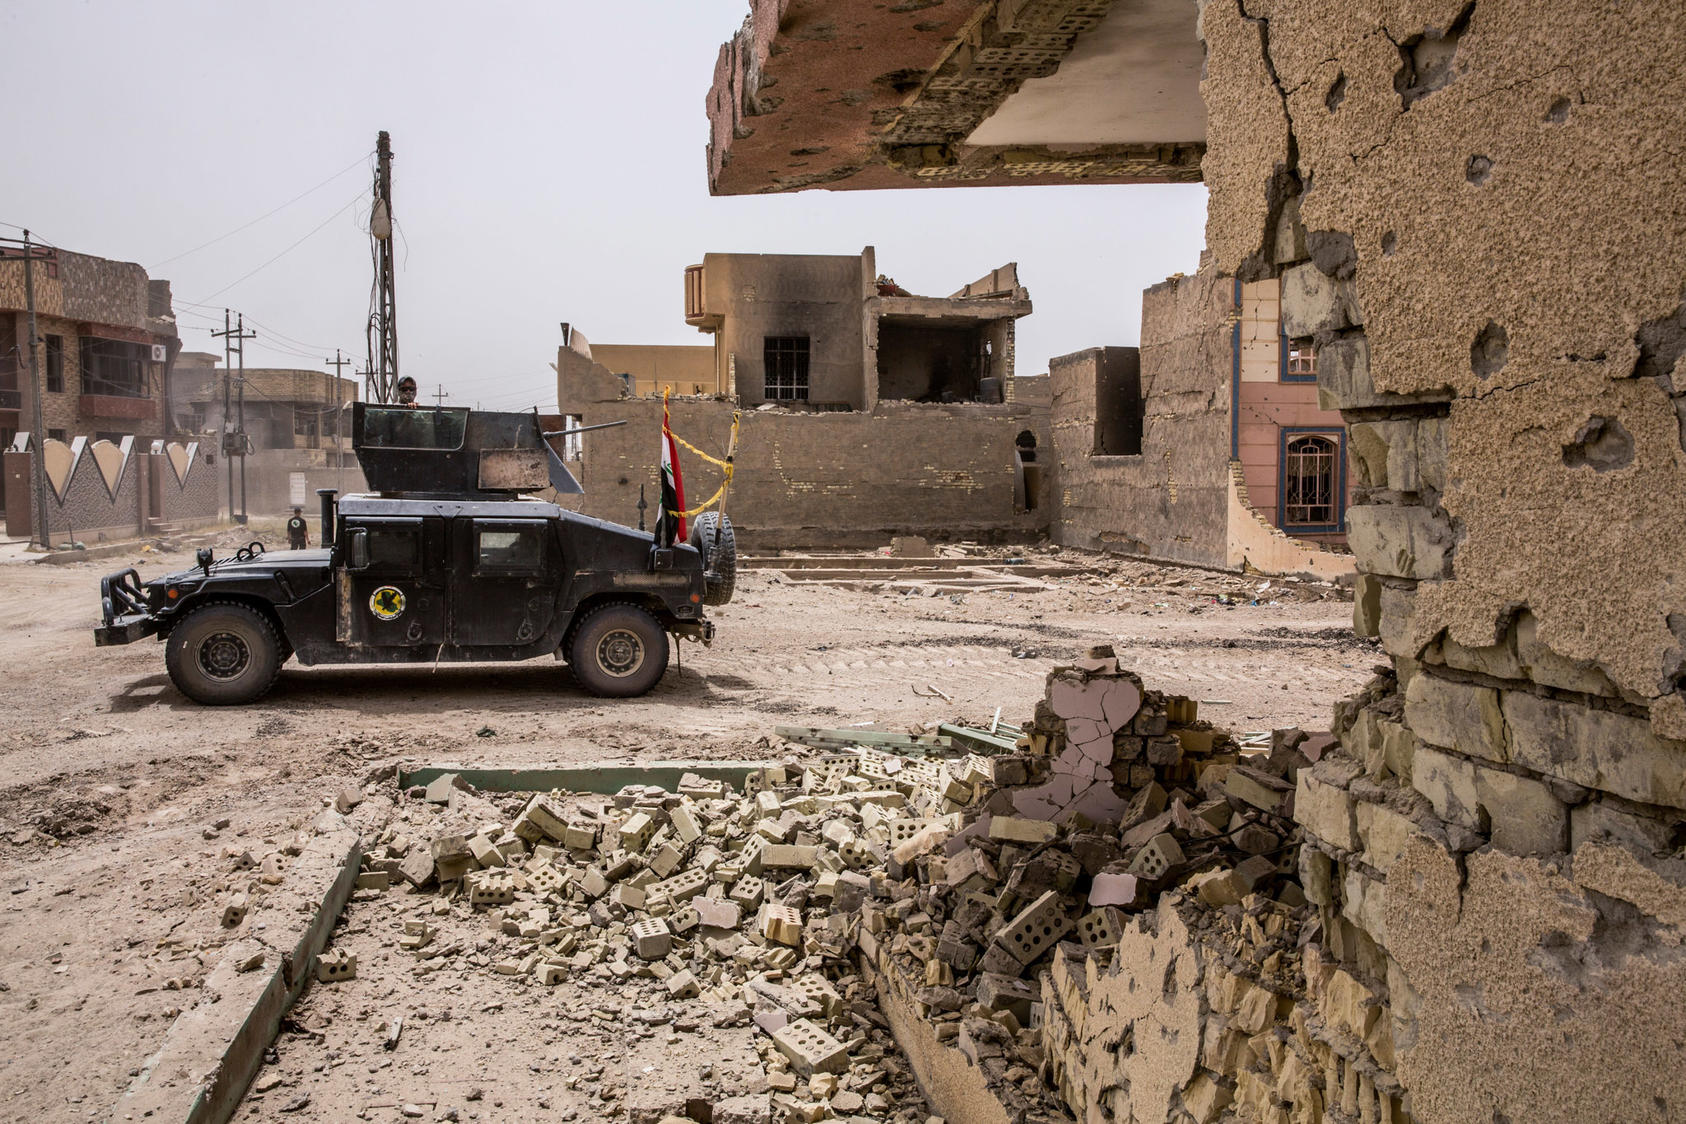 Iraqi counterterrorism forces move through the heavily damaged Shuhada neighborhood in Fallujah, Iraq, June 18, 2016. The Islamic State’s suicide attack in Baghdad in July, officials say, foreshadows the violence it will unleash as it reverts to its guerrilla roots. A return to guerrilla warfare in Iraq, while the United States and its allies still combat the Islamic State in Syria, would pose one of the first major challenges to the next American president. (Bryan Denton/The New York Times)